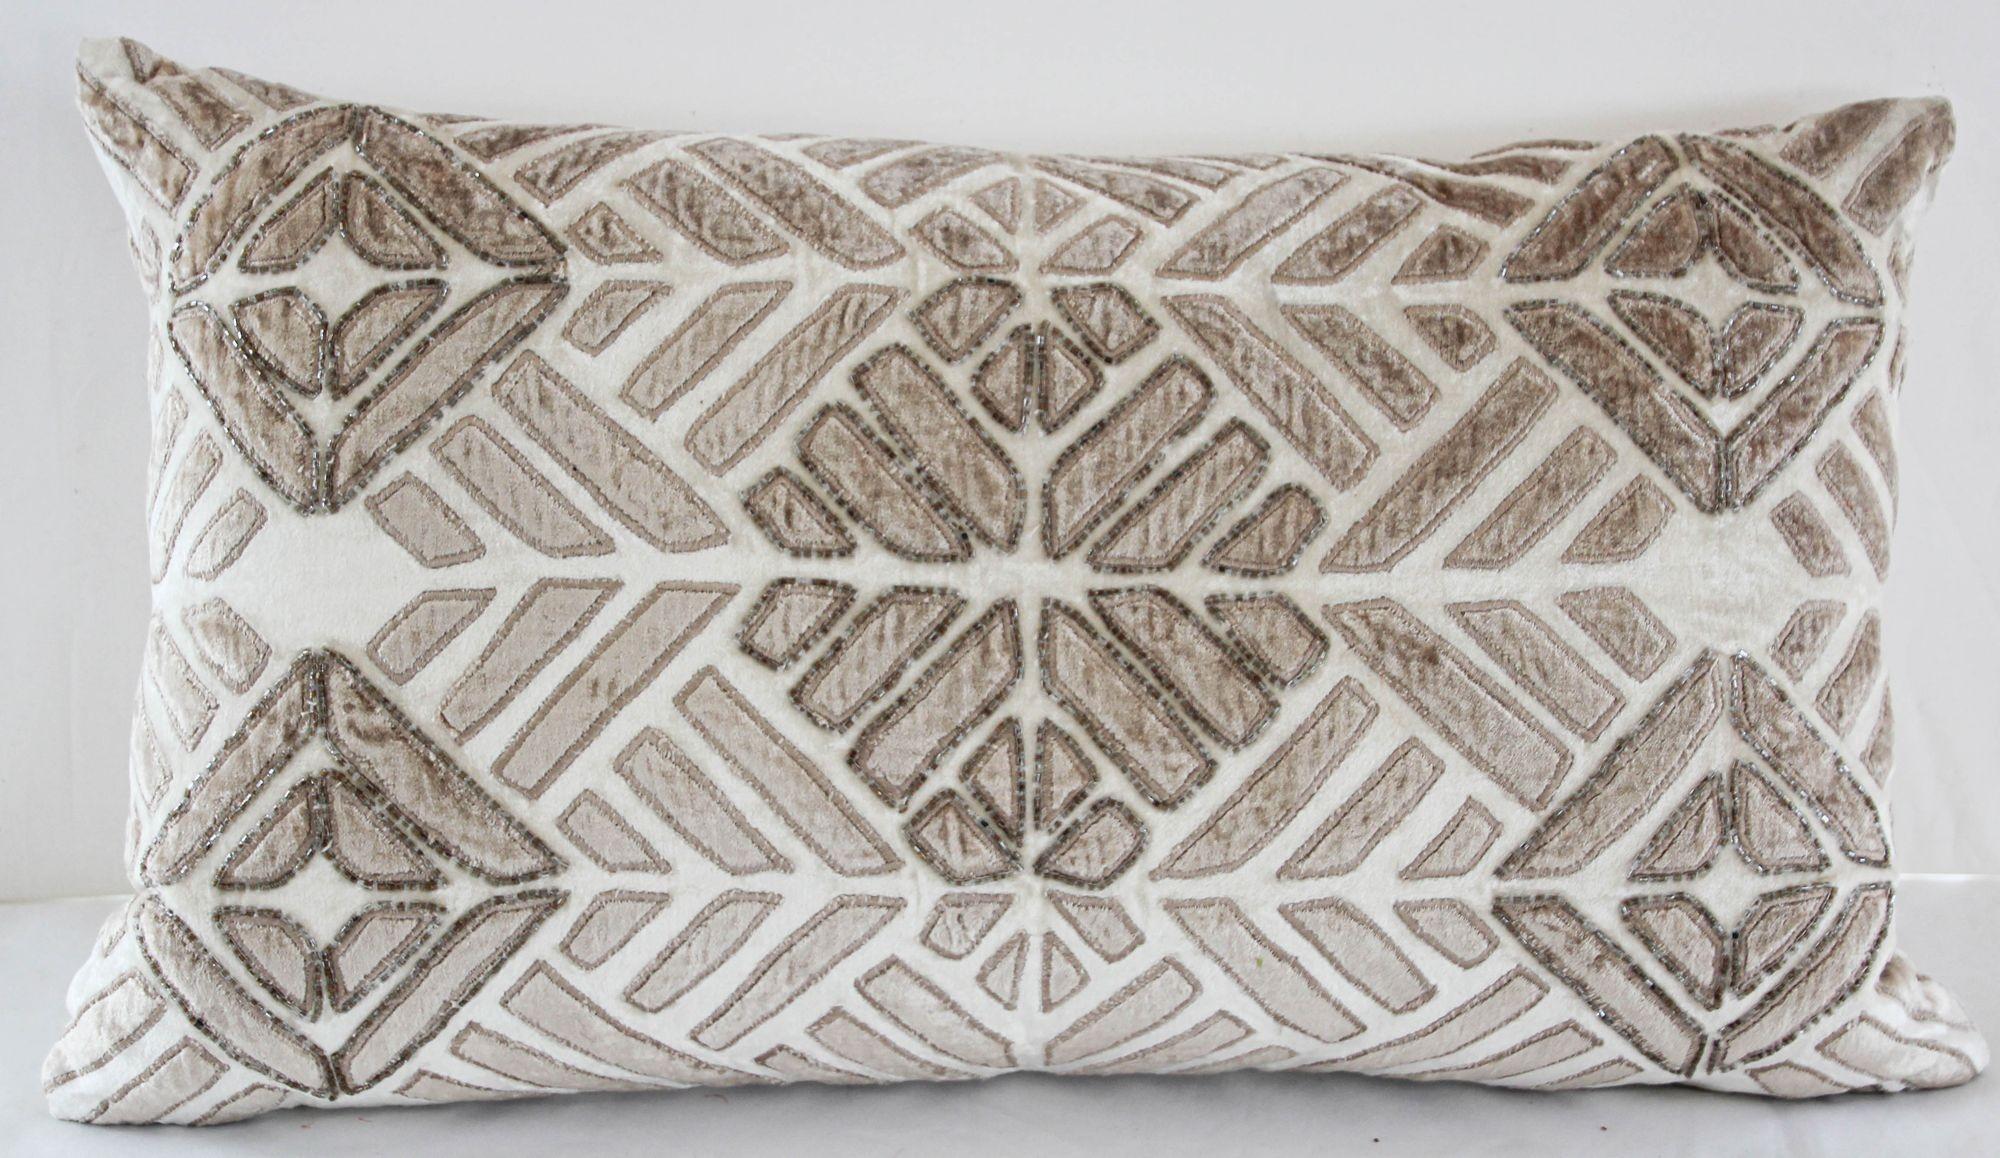 Vintage Taupe and Ivory Cut Velvet Pillow with Metallic Beads For Sale 7